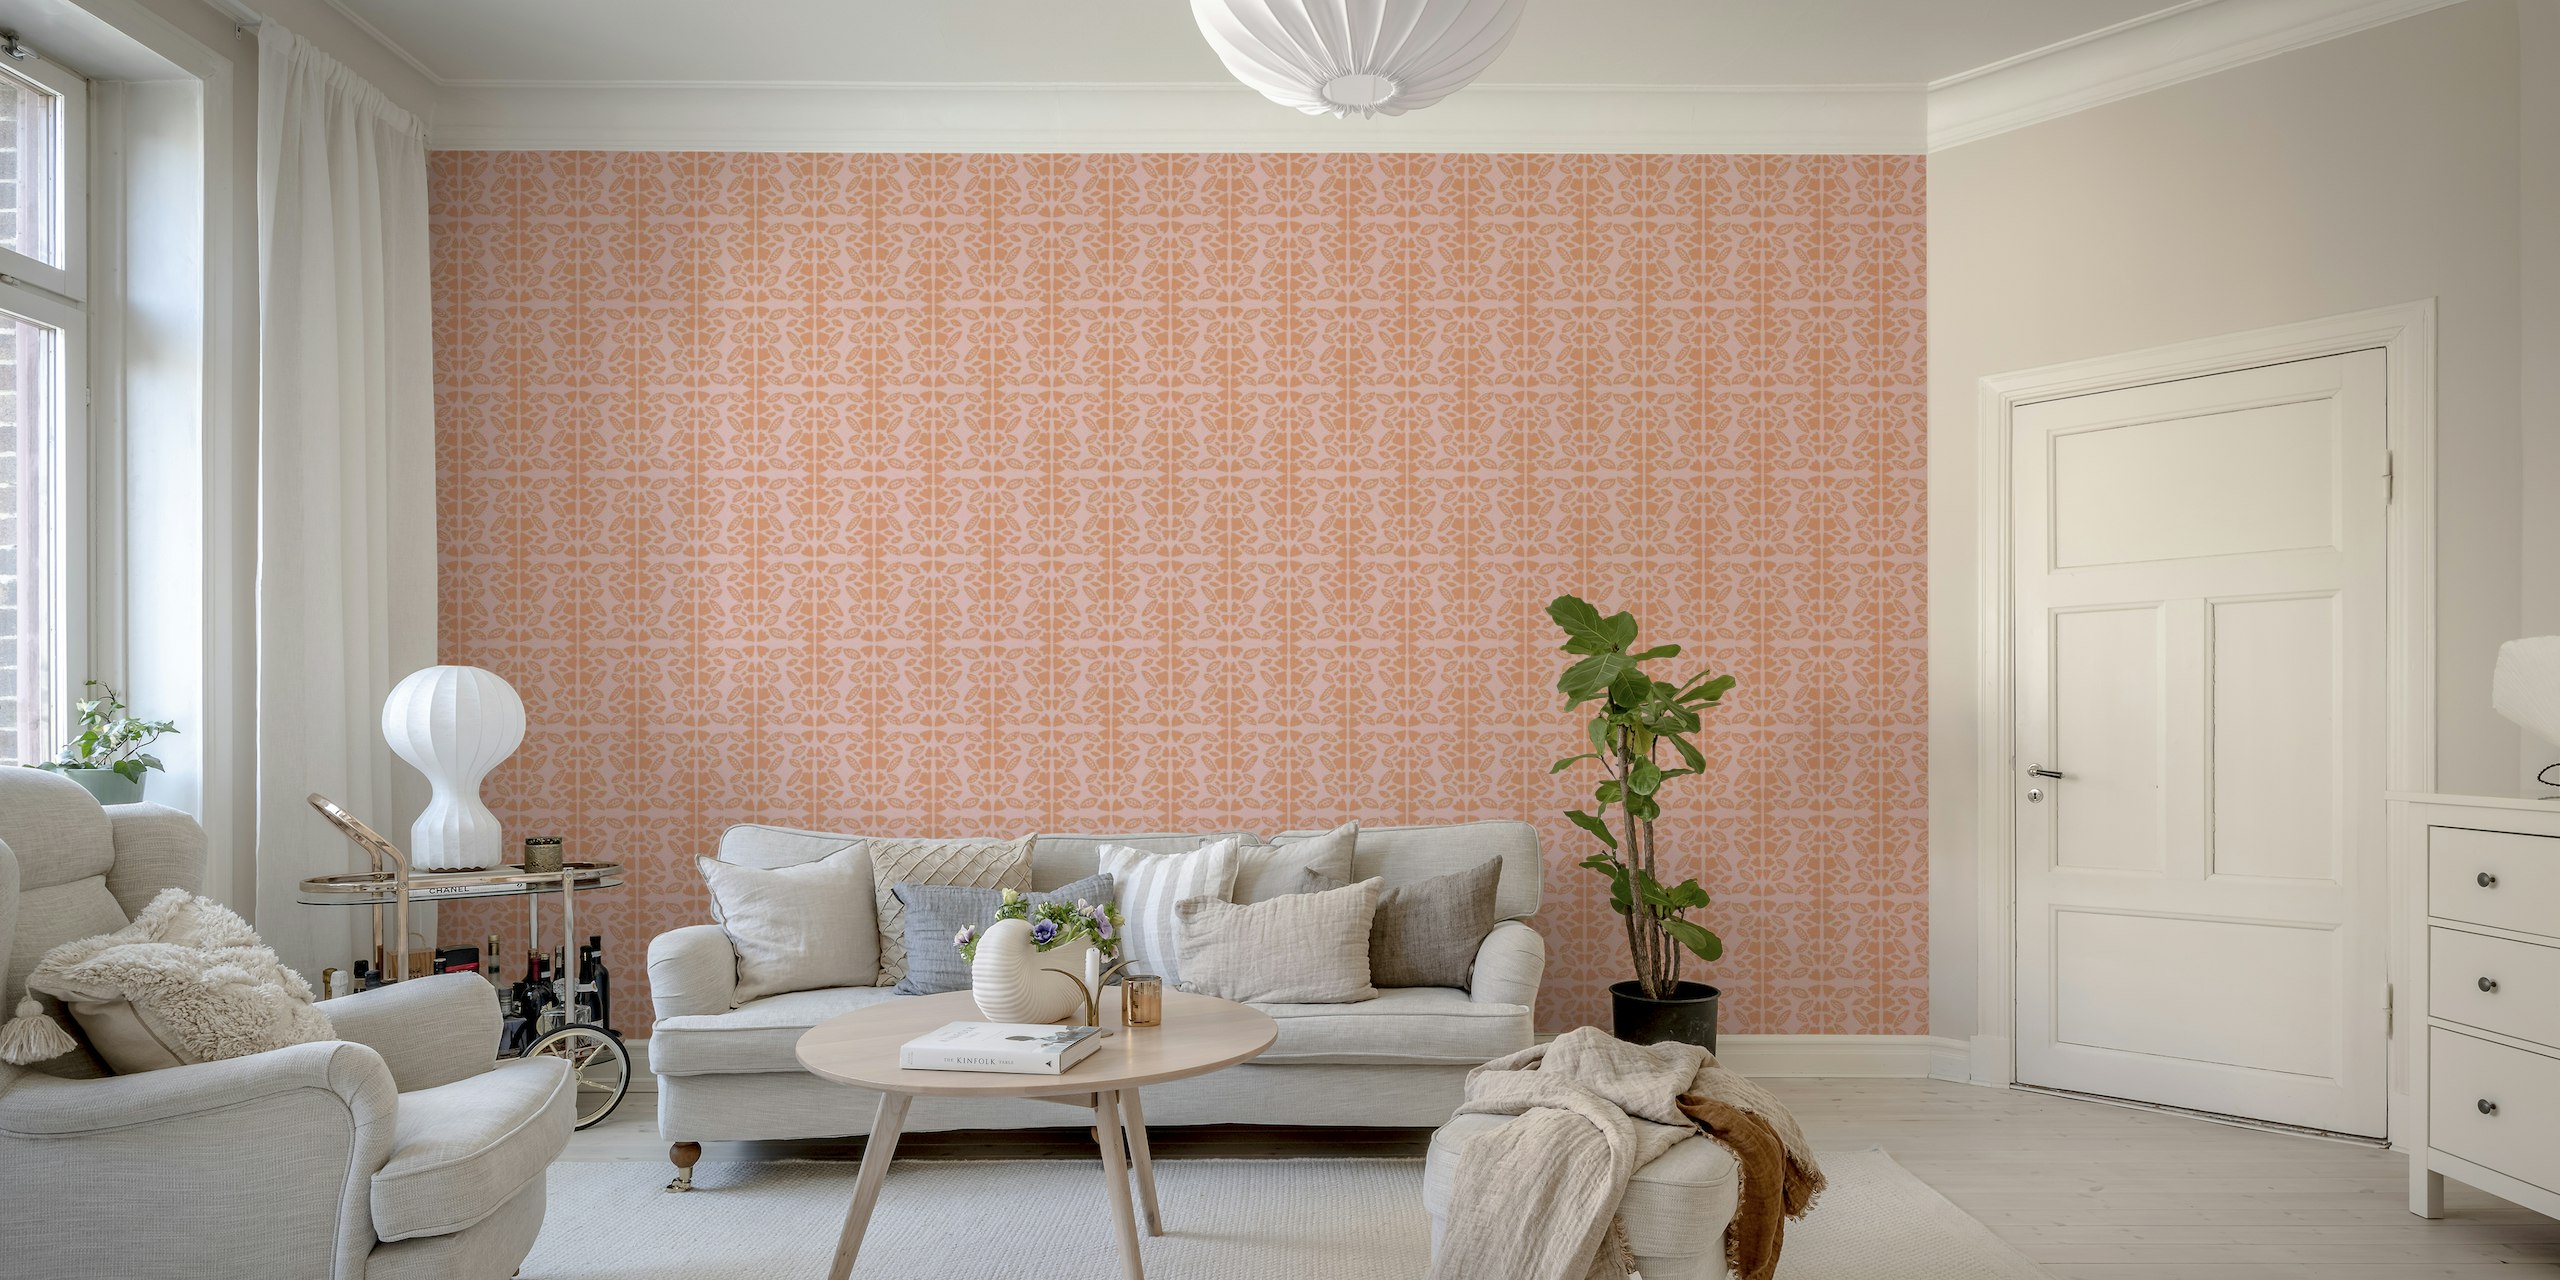 Light pink wall mural with delicate botanical patterns